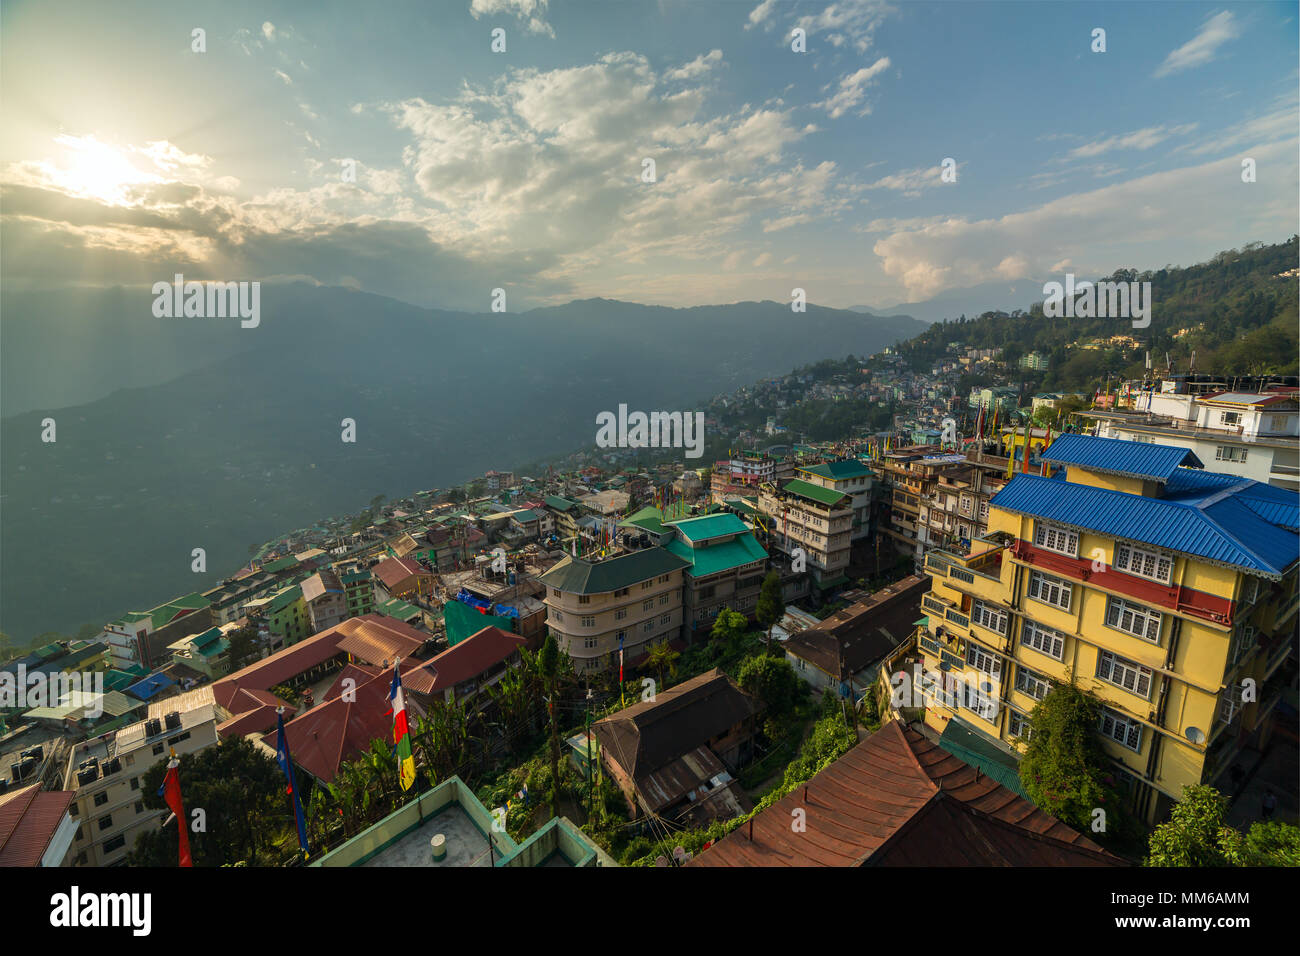 Beautiful aerial view of the Gangtok city, capital of Sikkim state, Northern India. Stock Photo